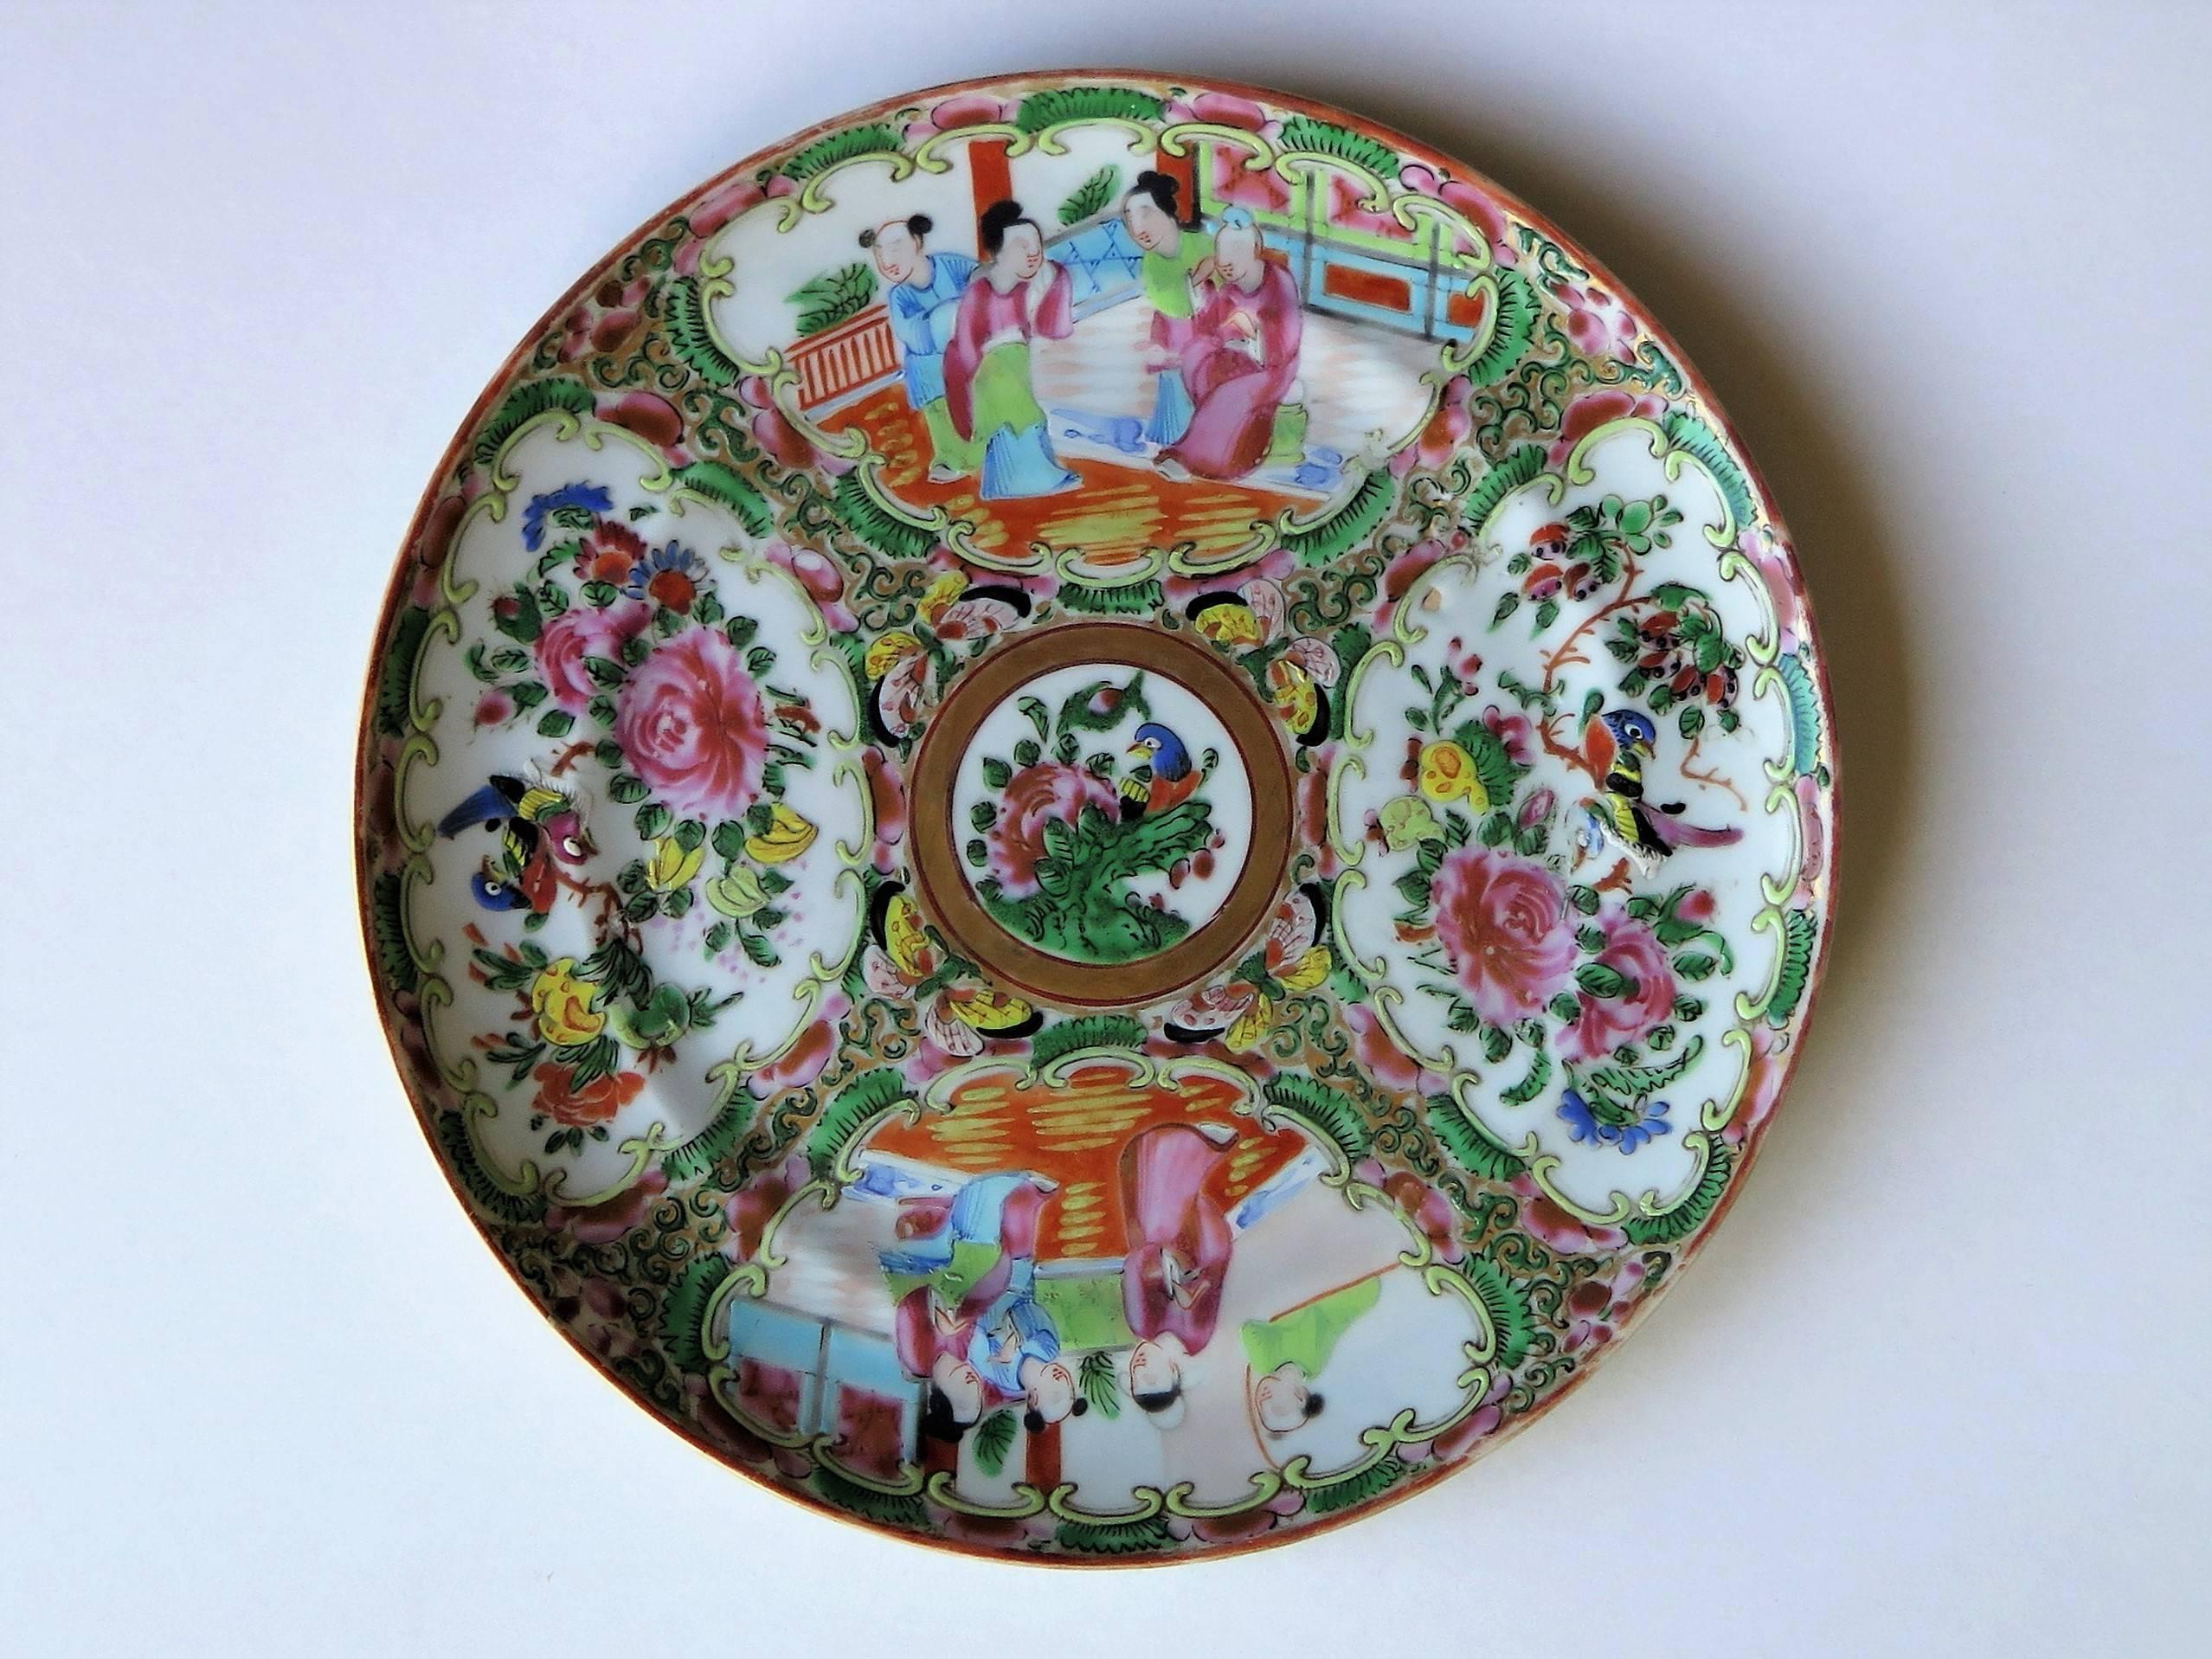 This is a very decorative Chinese export, porcelain, Rose Medallion dish or plate which we date to the 19th century, Qing dynasty, circa 1870.

It is hand-painted in the Canton or Chinese export, rose medallion decoration with four panels consisting